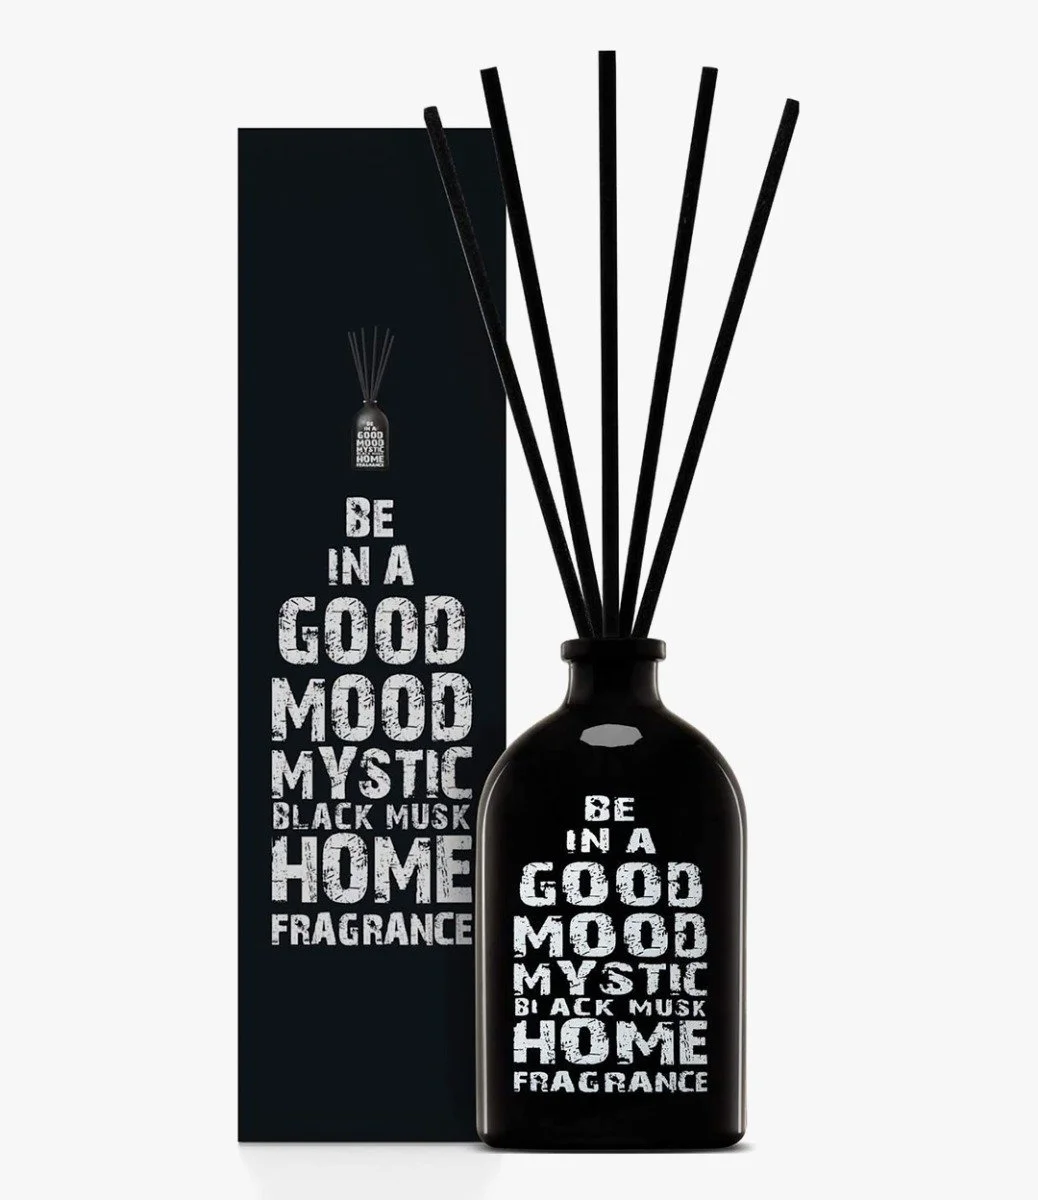 Be in a Good Mood Reed Diffusers – Black Musk by Gifted